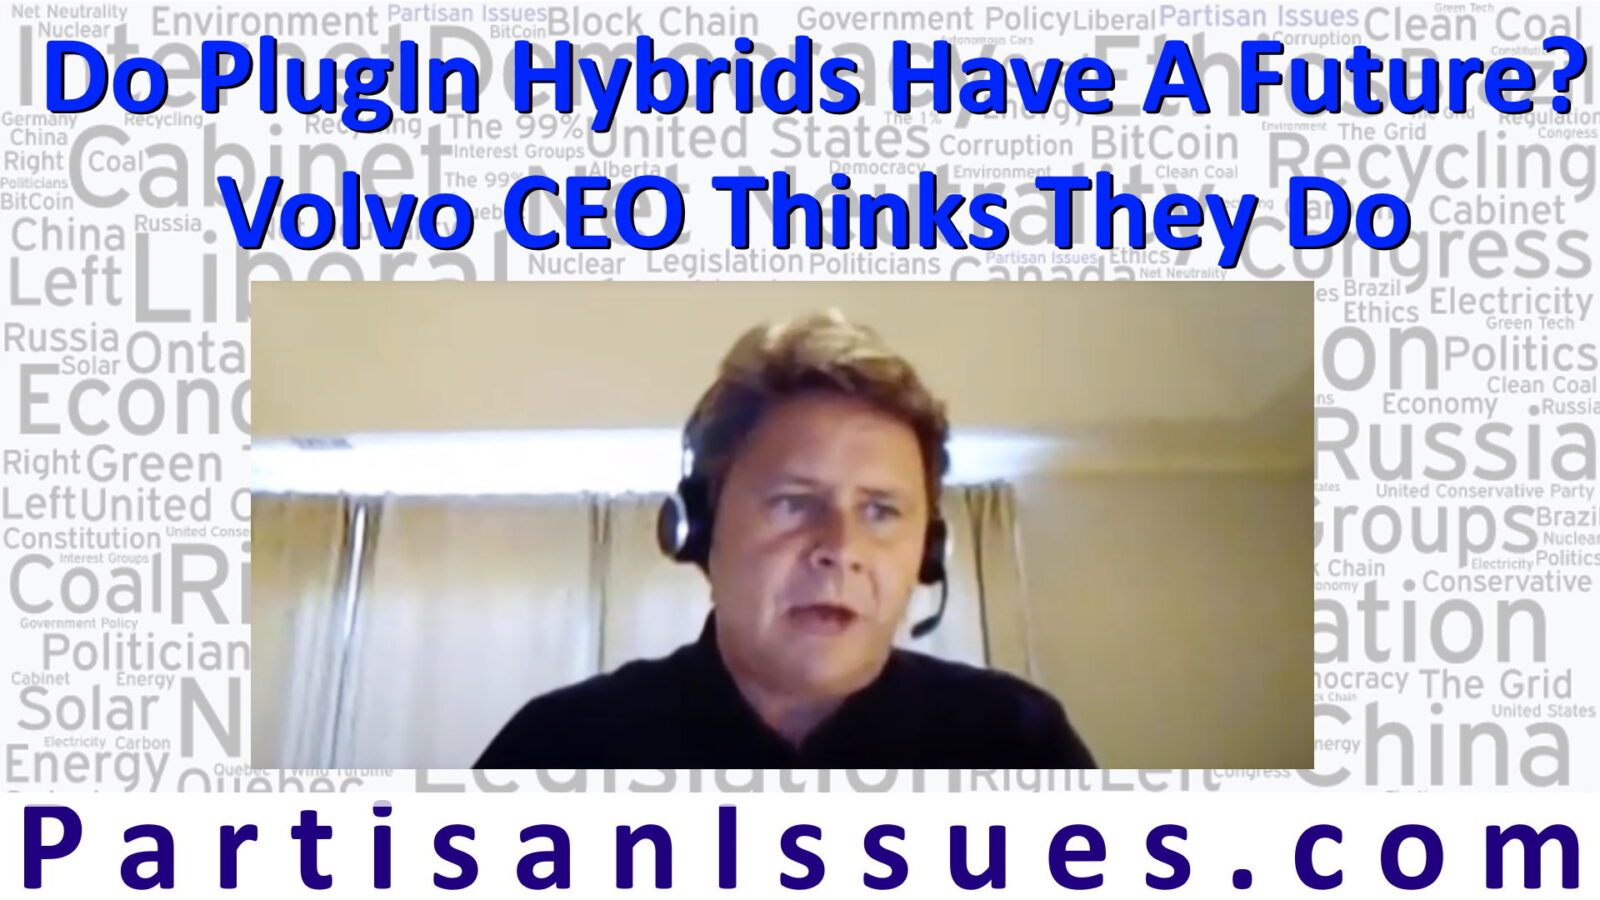 Do PlugIn Hybrids Have a Future - Volvo CEO Thinks they Do